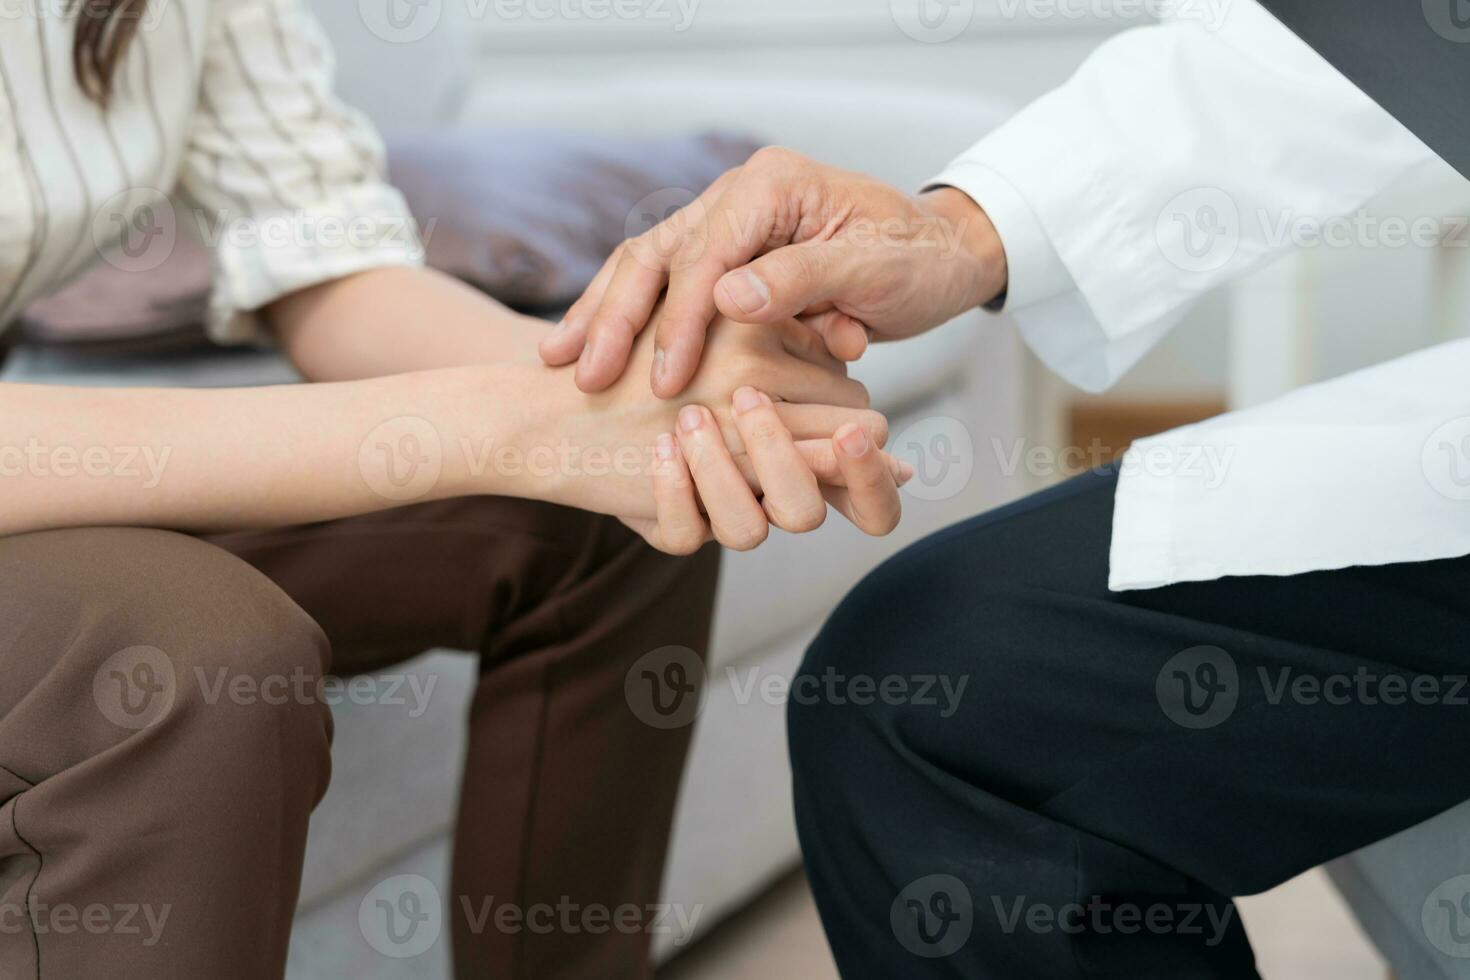 psychiatrist hold hand support each while discussing family issues. doctor encourages and empathy woman suffers depression. psychological, save divorce, Hand in hand together, trust, care photo